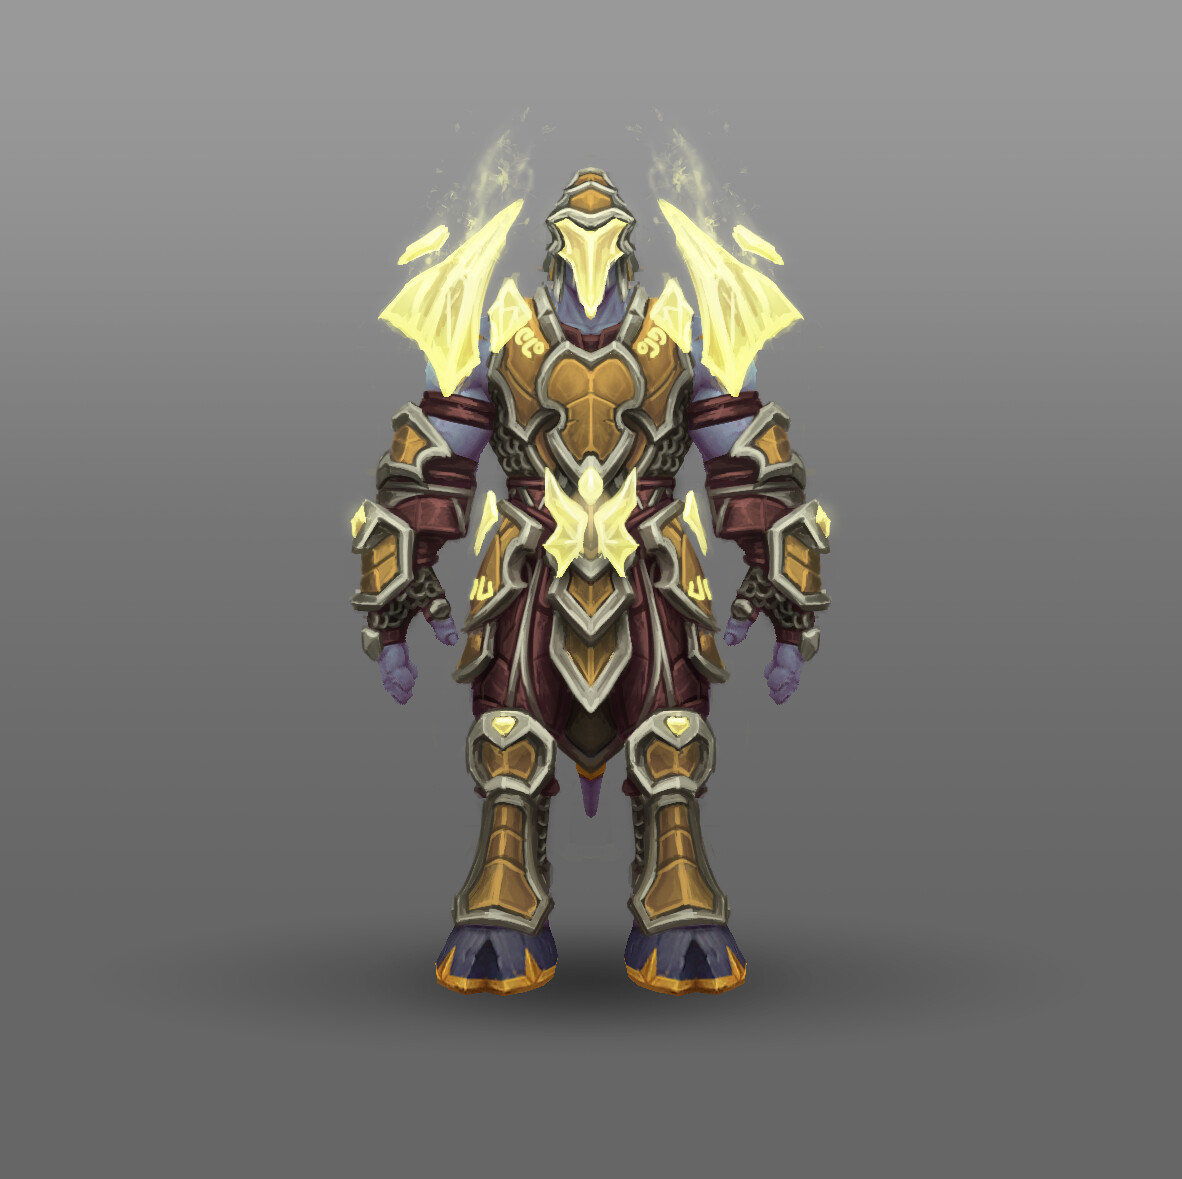 Hunter
With the regular draenei I had a "ranger" approach to its design. For the Lightforged I wanted a more high tech design, hence the stronger use of crystals in its design.